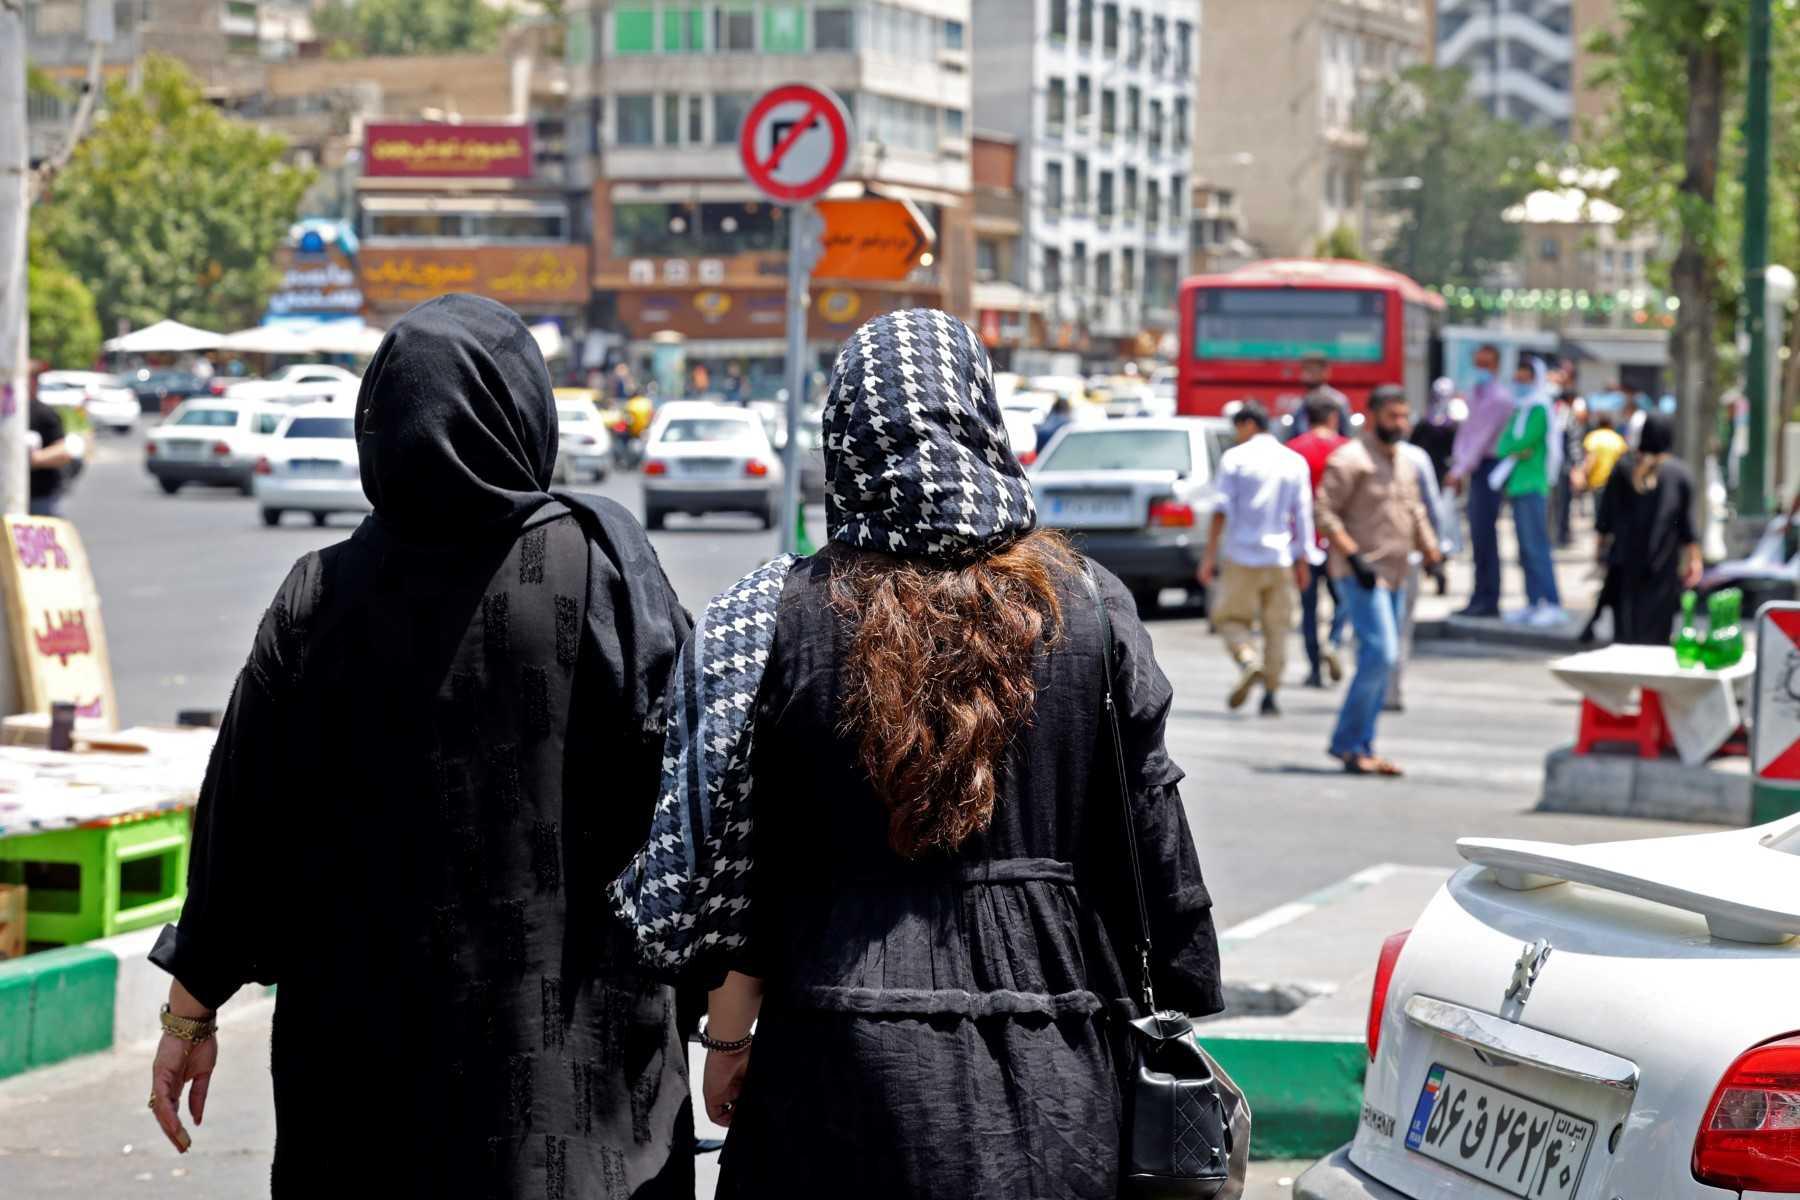 Women wearing headscarves walk in the streets of Tehran near, Tajrish Square, on July 12. Iranian law requires all women, regardless of nationality or religious belief, to wear a hijab that covers the head and neck while concealing the hair although many have pushed the boundaries over the years. Photo: AFP
